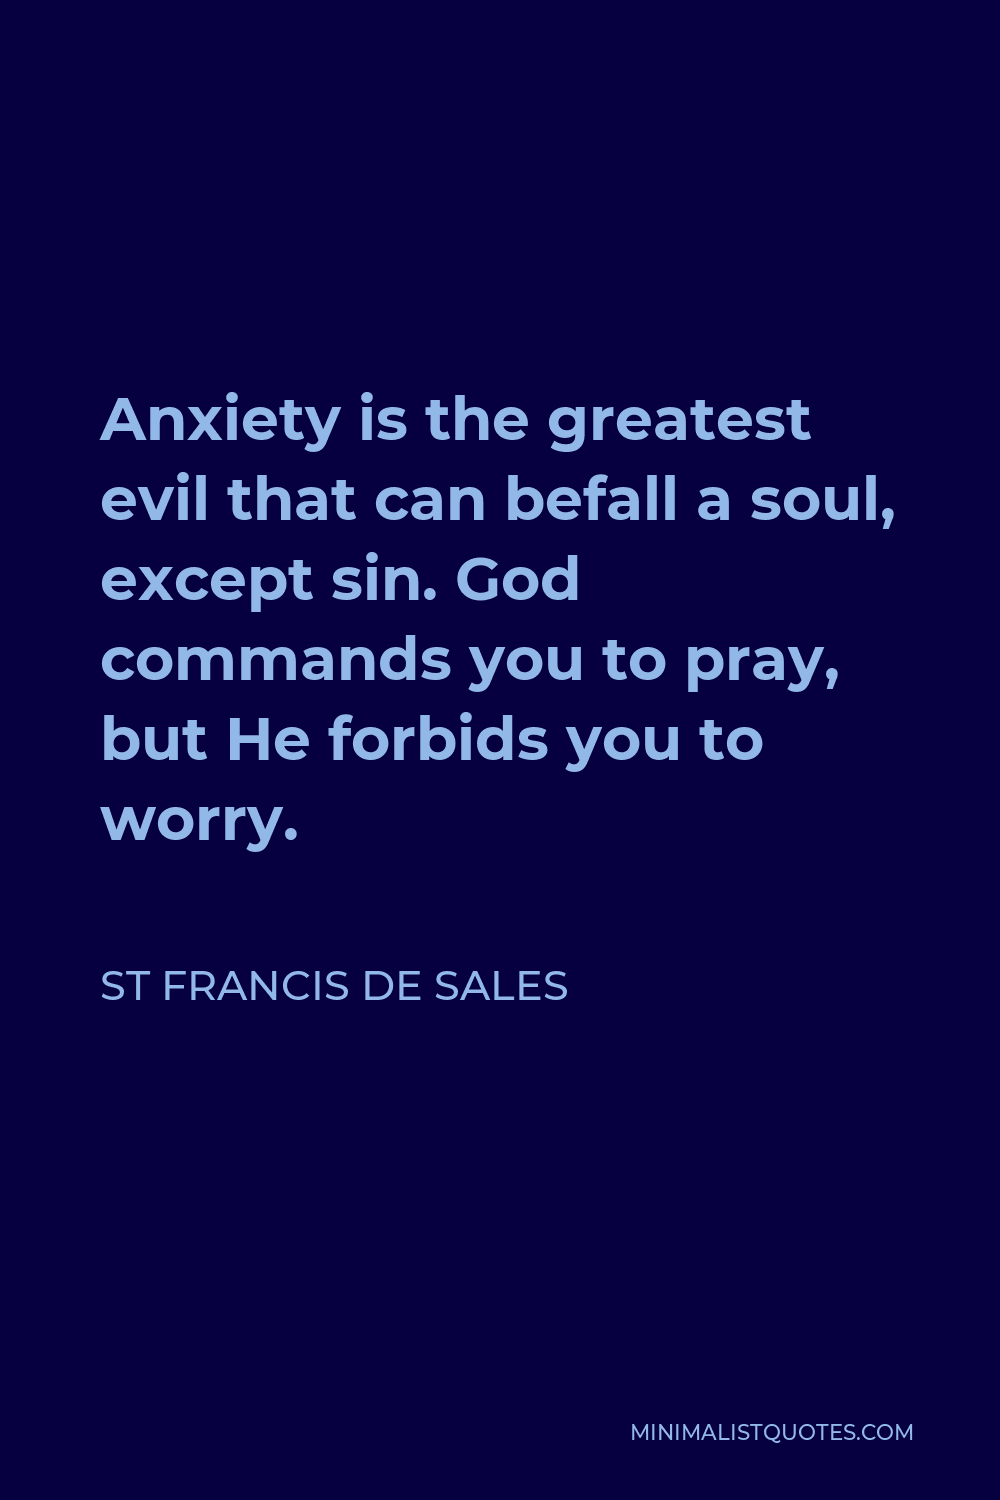 St Francis De Sales Quote - Anxiety is the greatest evil that can befall a soul, except sin. God commands you to pray, but He forbids you to worry.